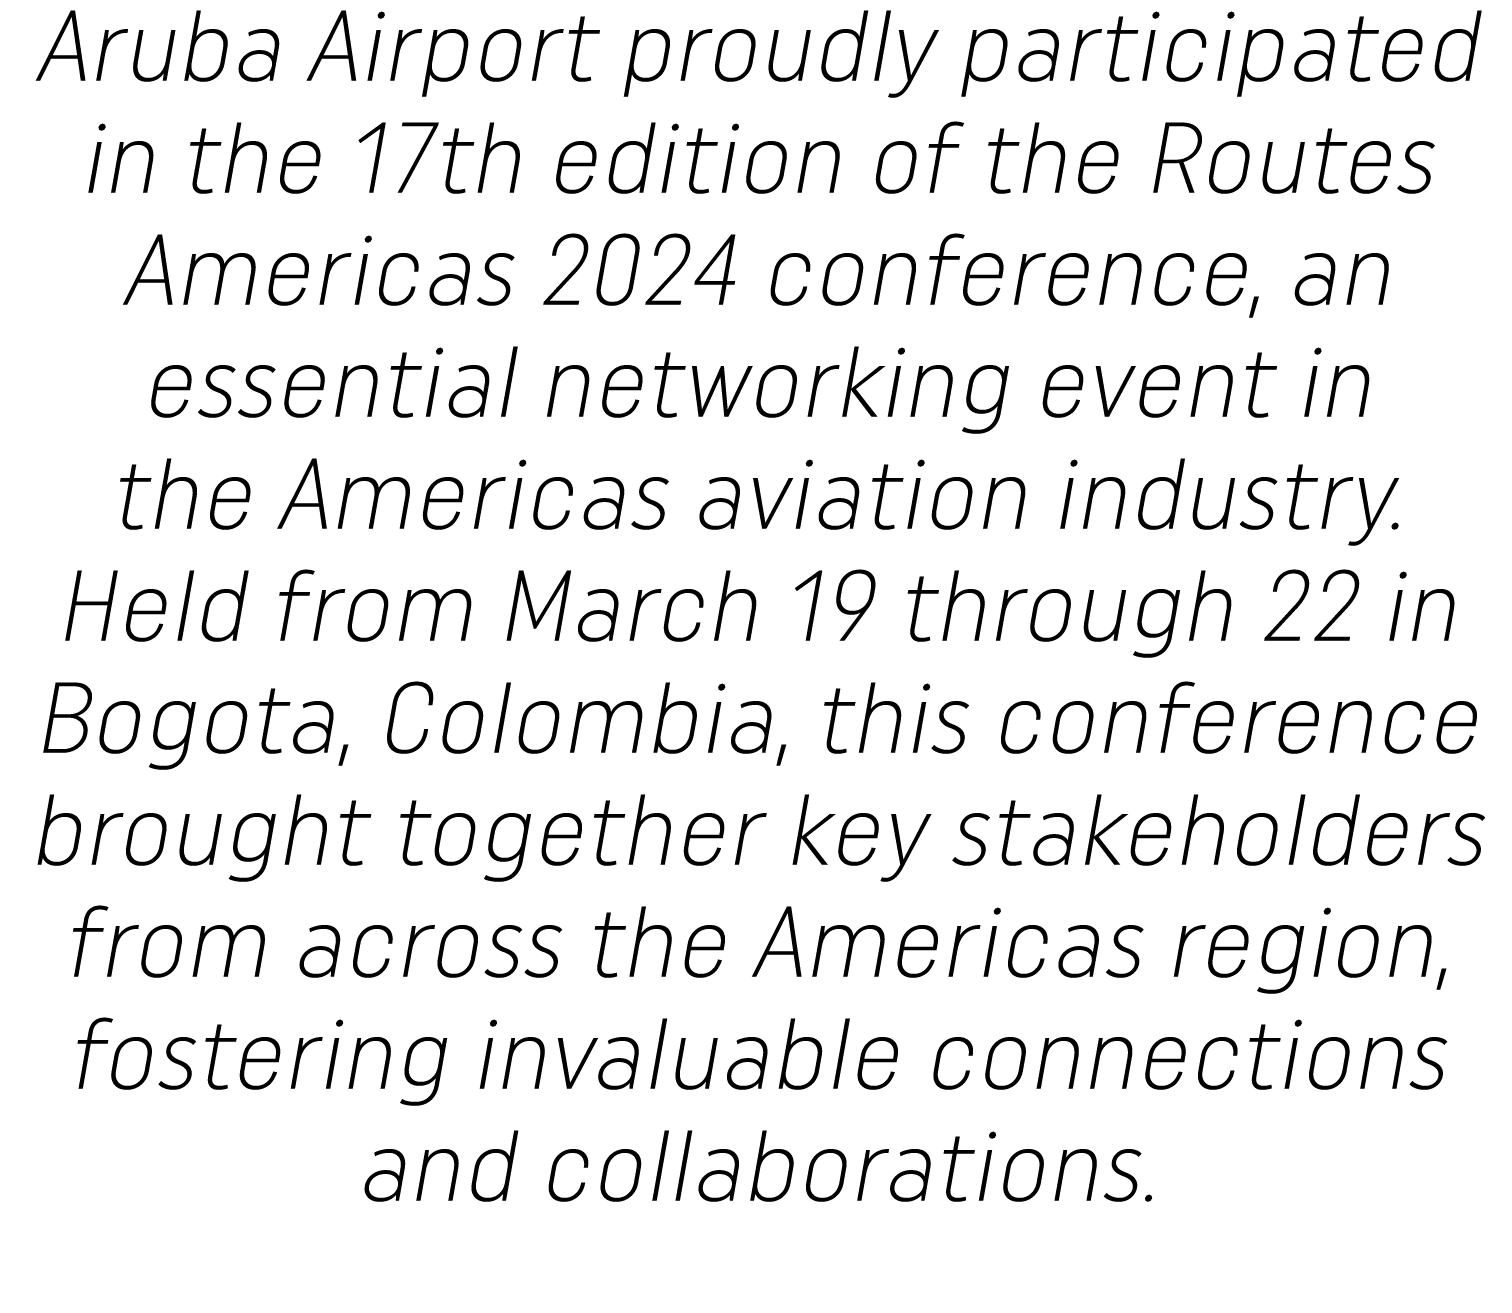 Aruba Airport proudly participated in the 17th edition of the Routes Americas 2024 conference, an essential networkin   